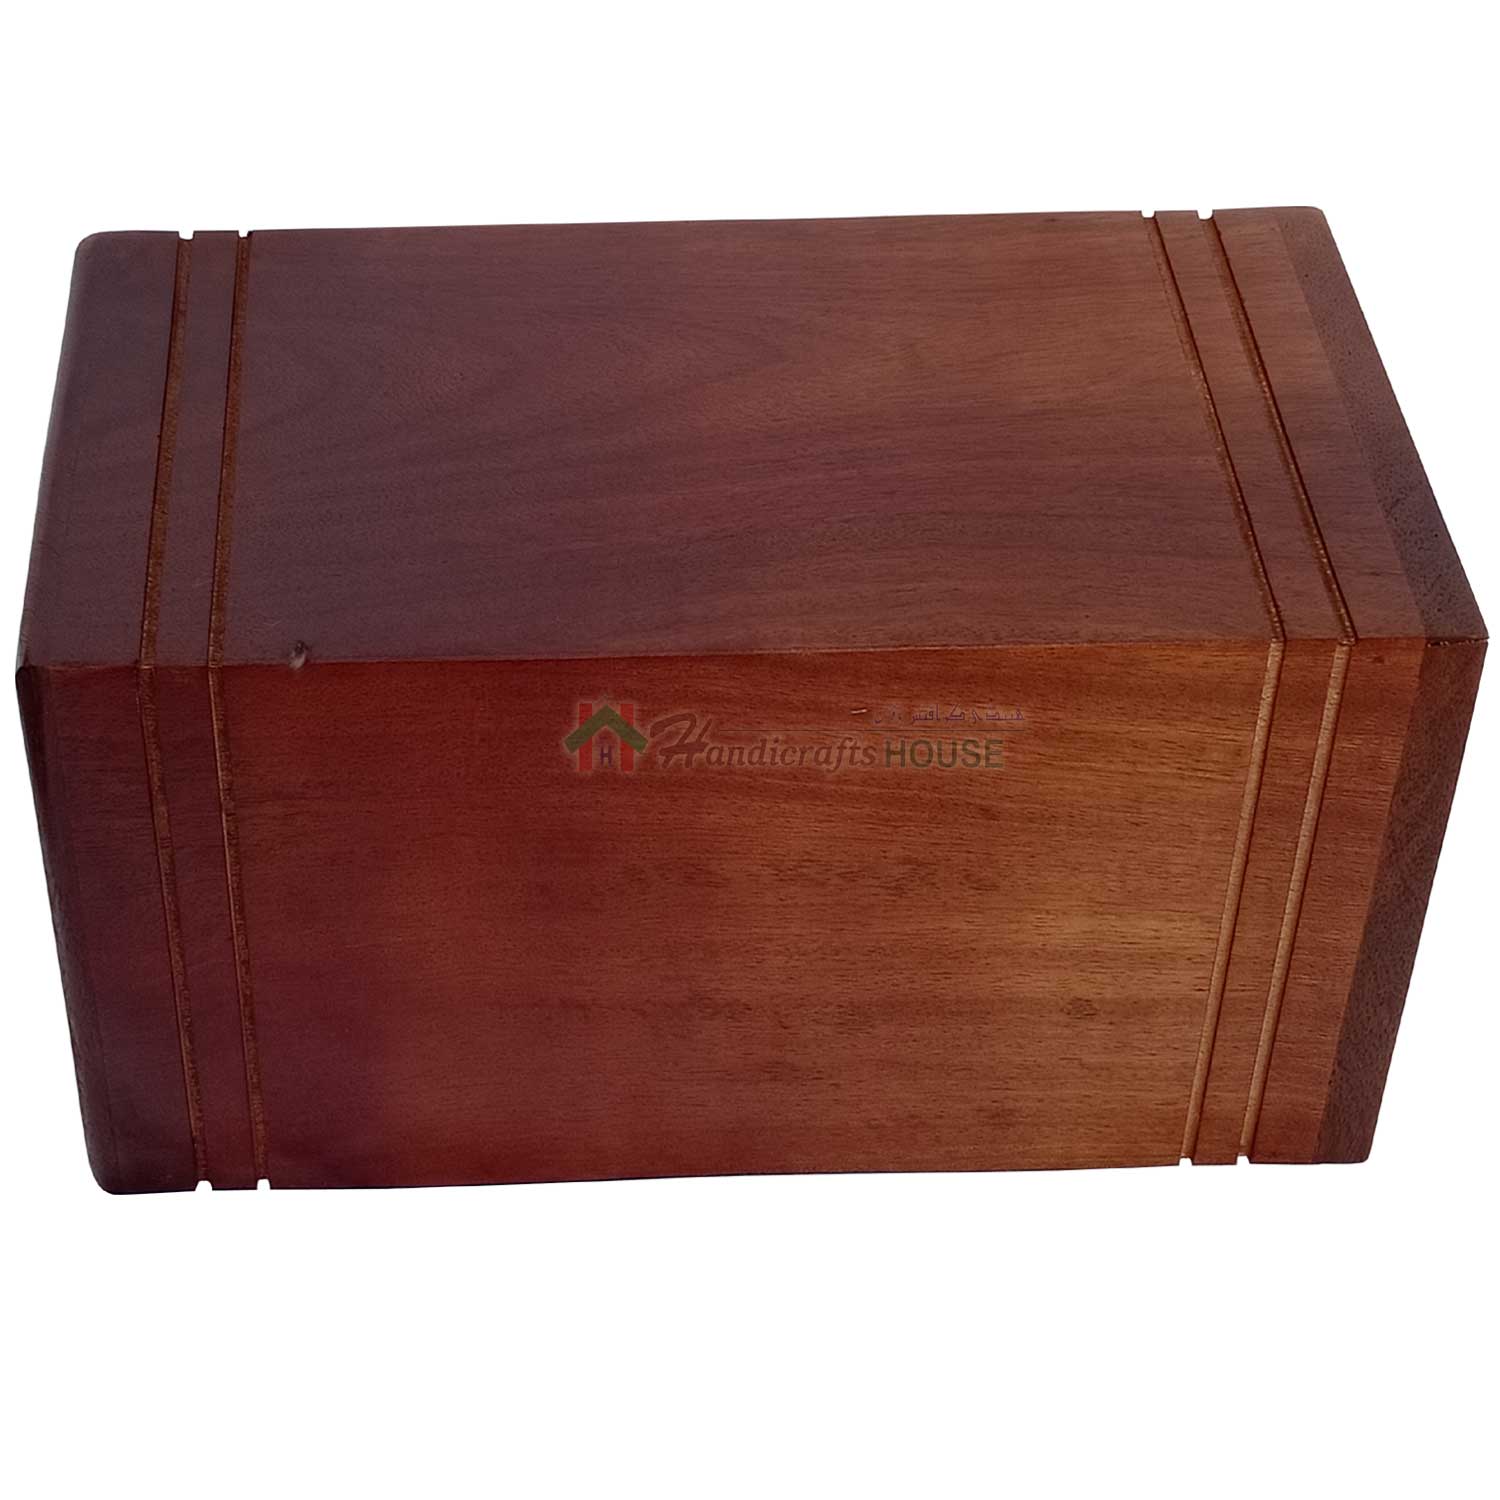 3D Hands Praying Rosewood Urns for Human or Pet Ashes, Wooden Funeral Cremation Urn for Adult, Burial Keepsake – Memorials Box